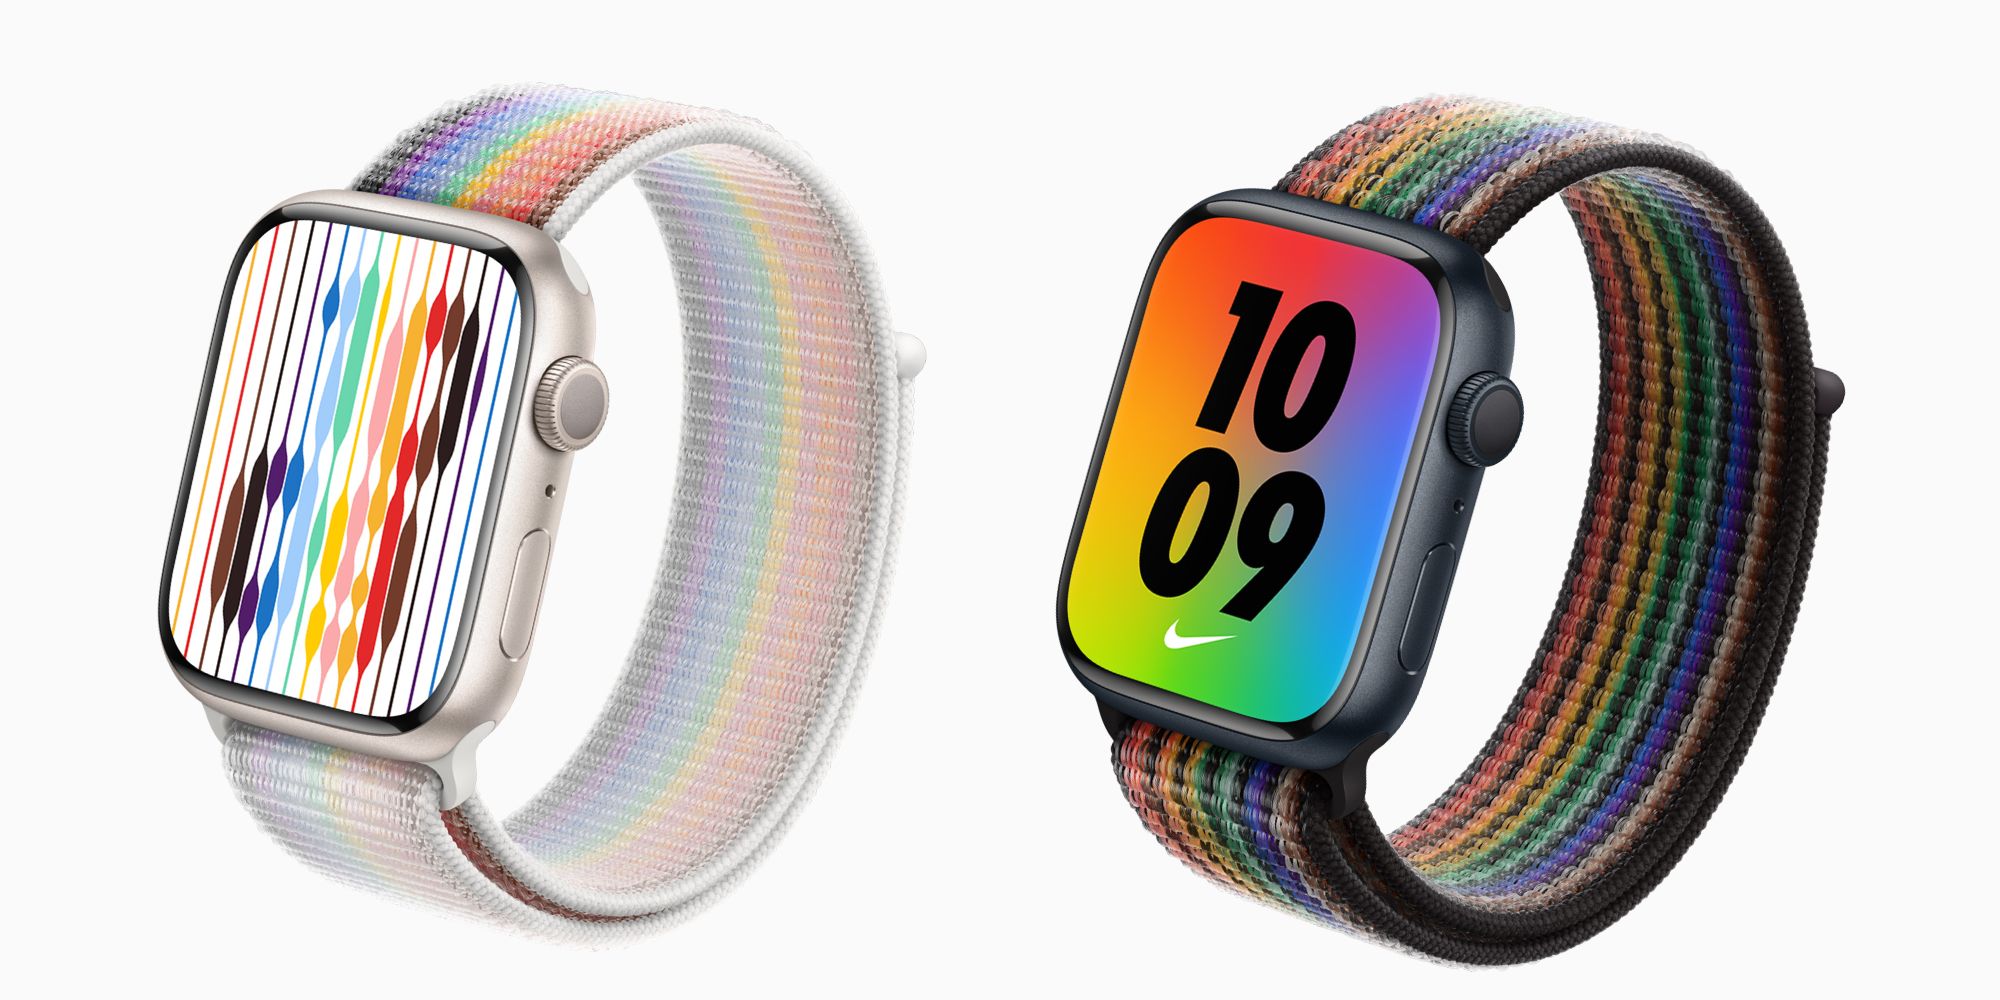 The new 2022 Pride bands on the Apple Watch